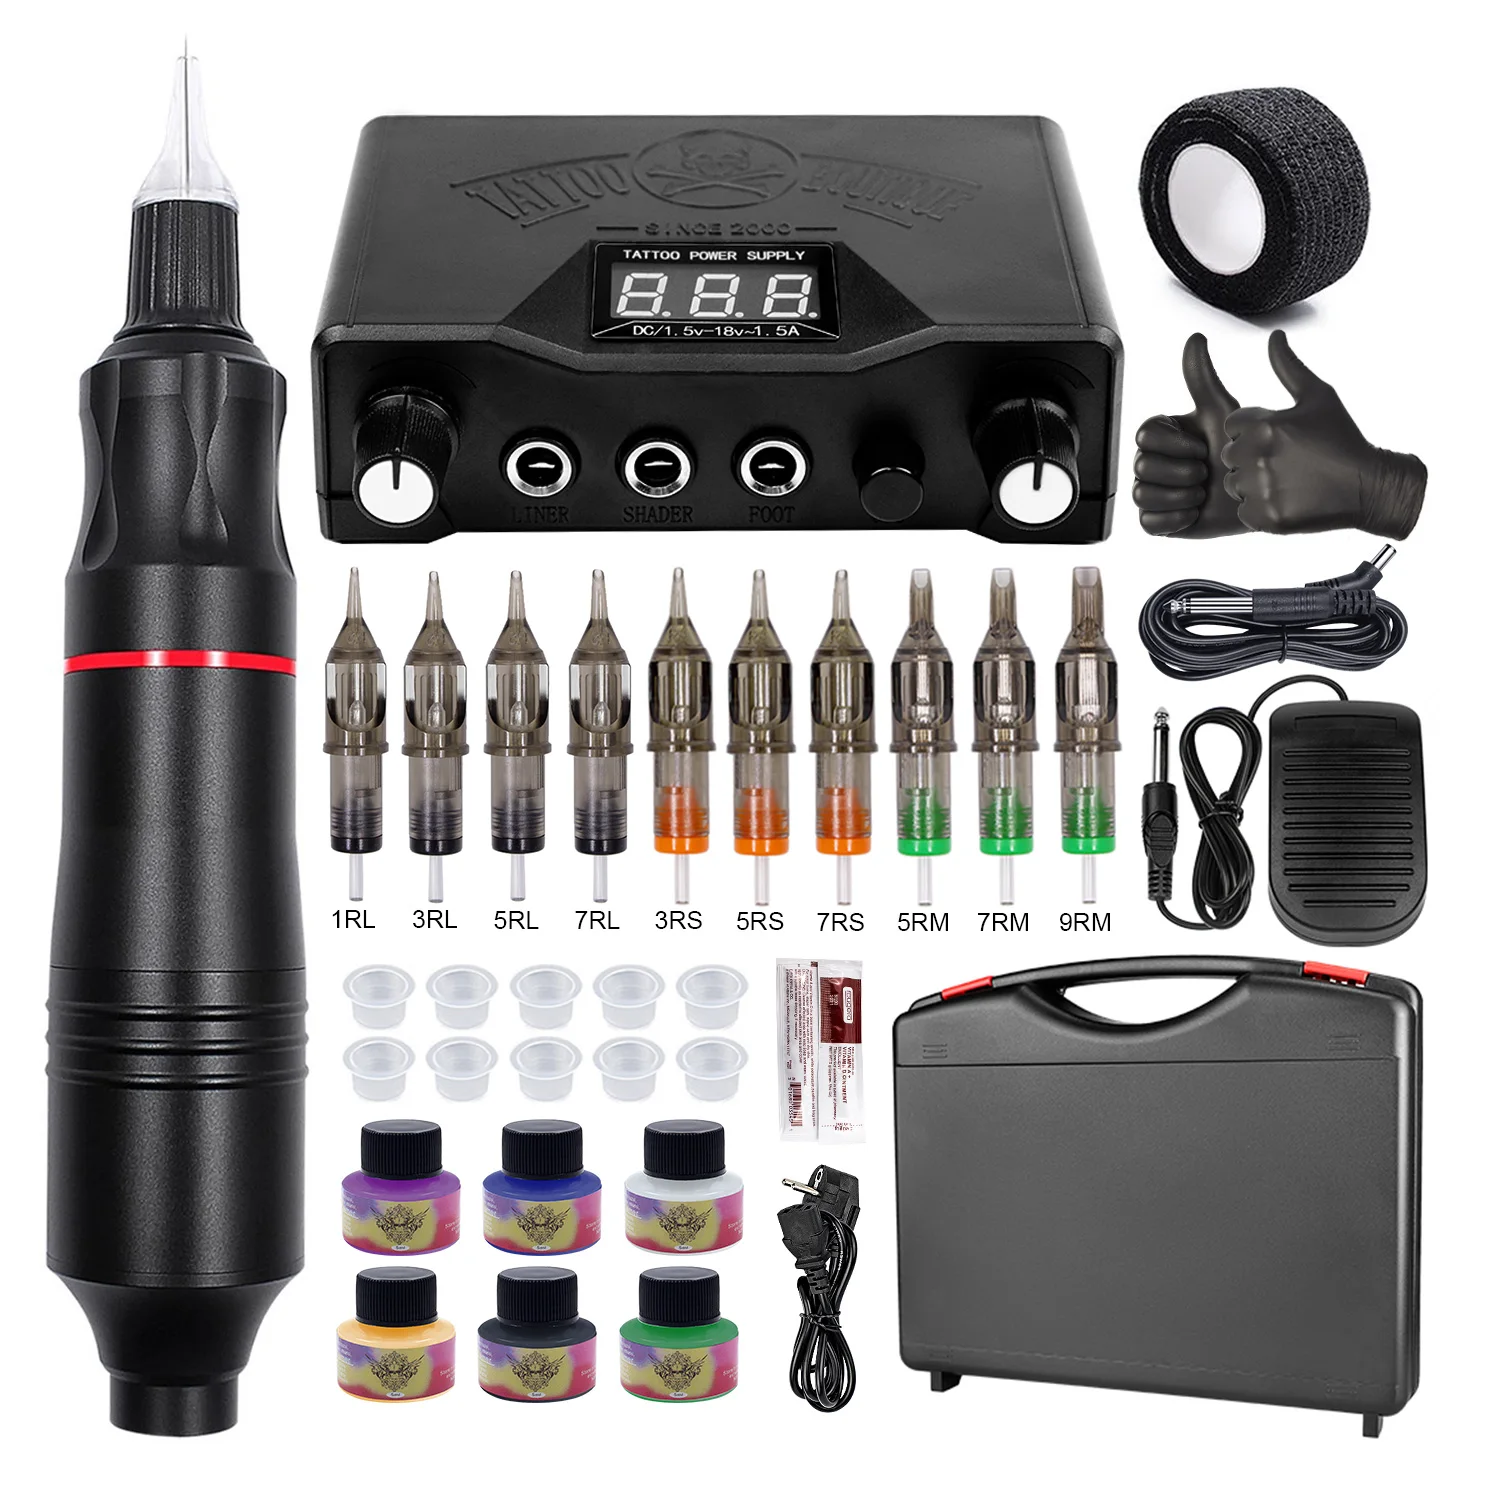 Share 92+ about tattoo machine full kit unmissable .vn